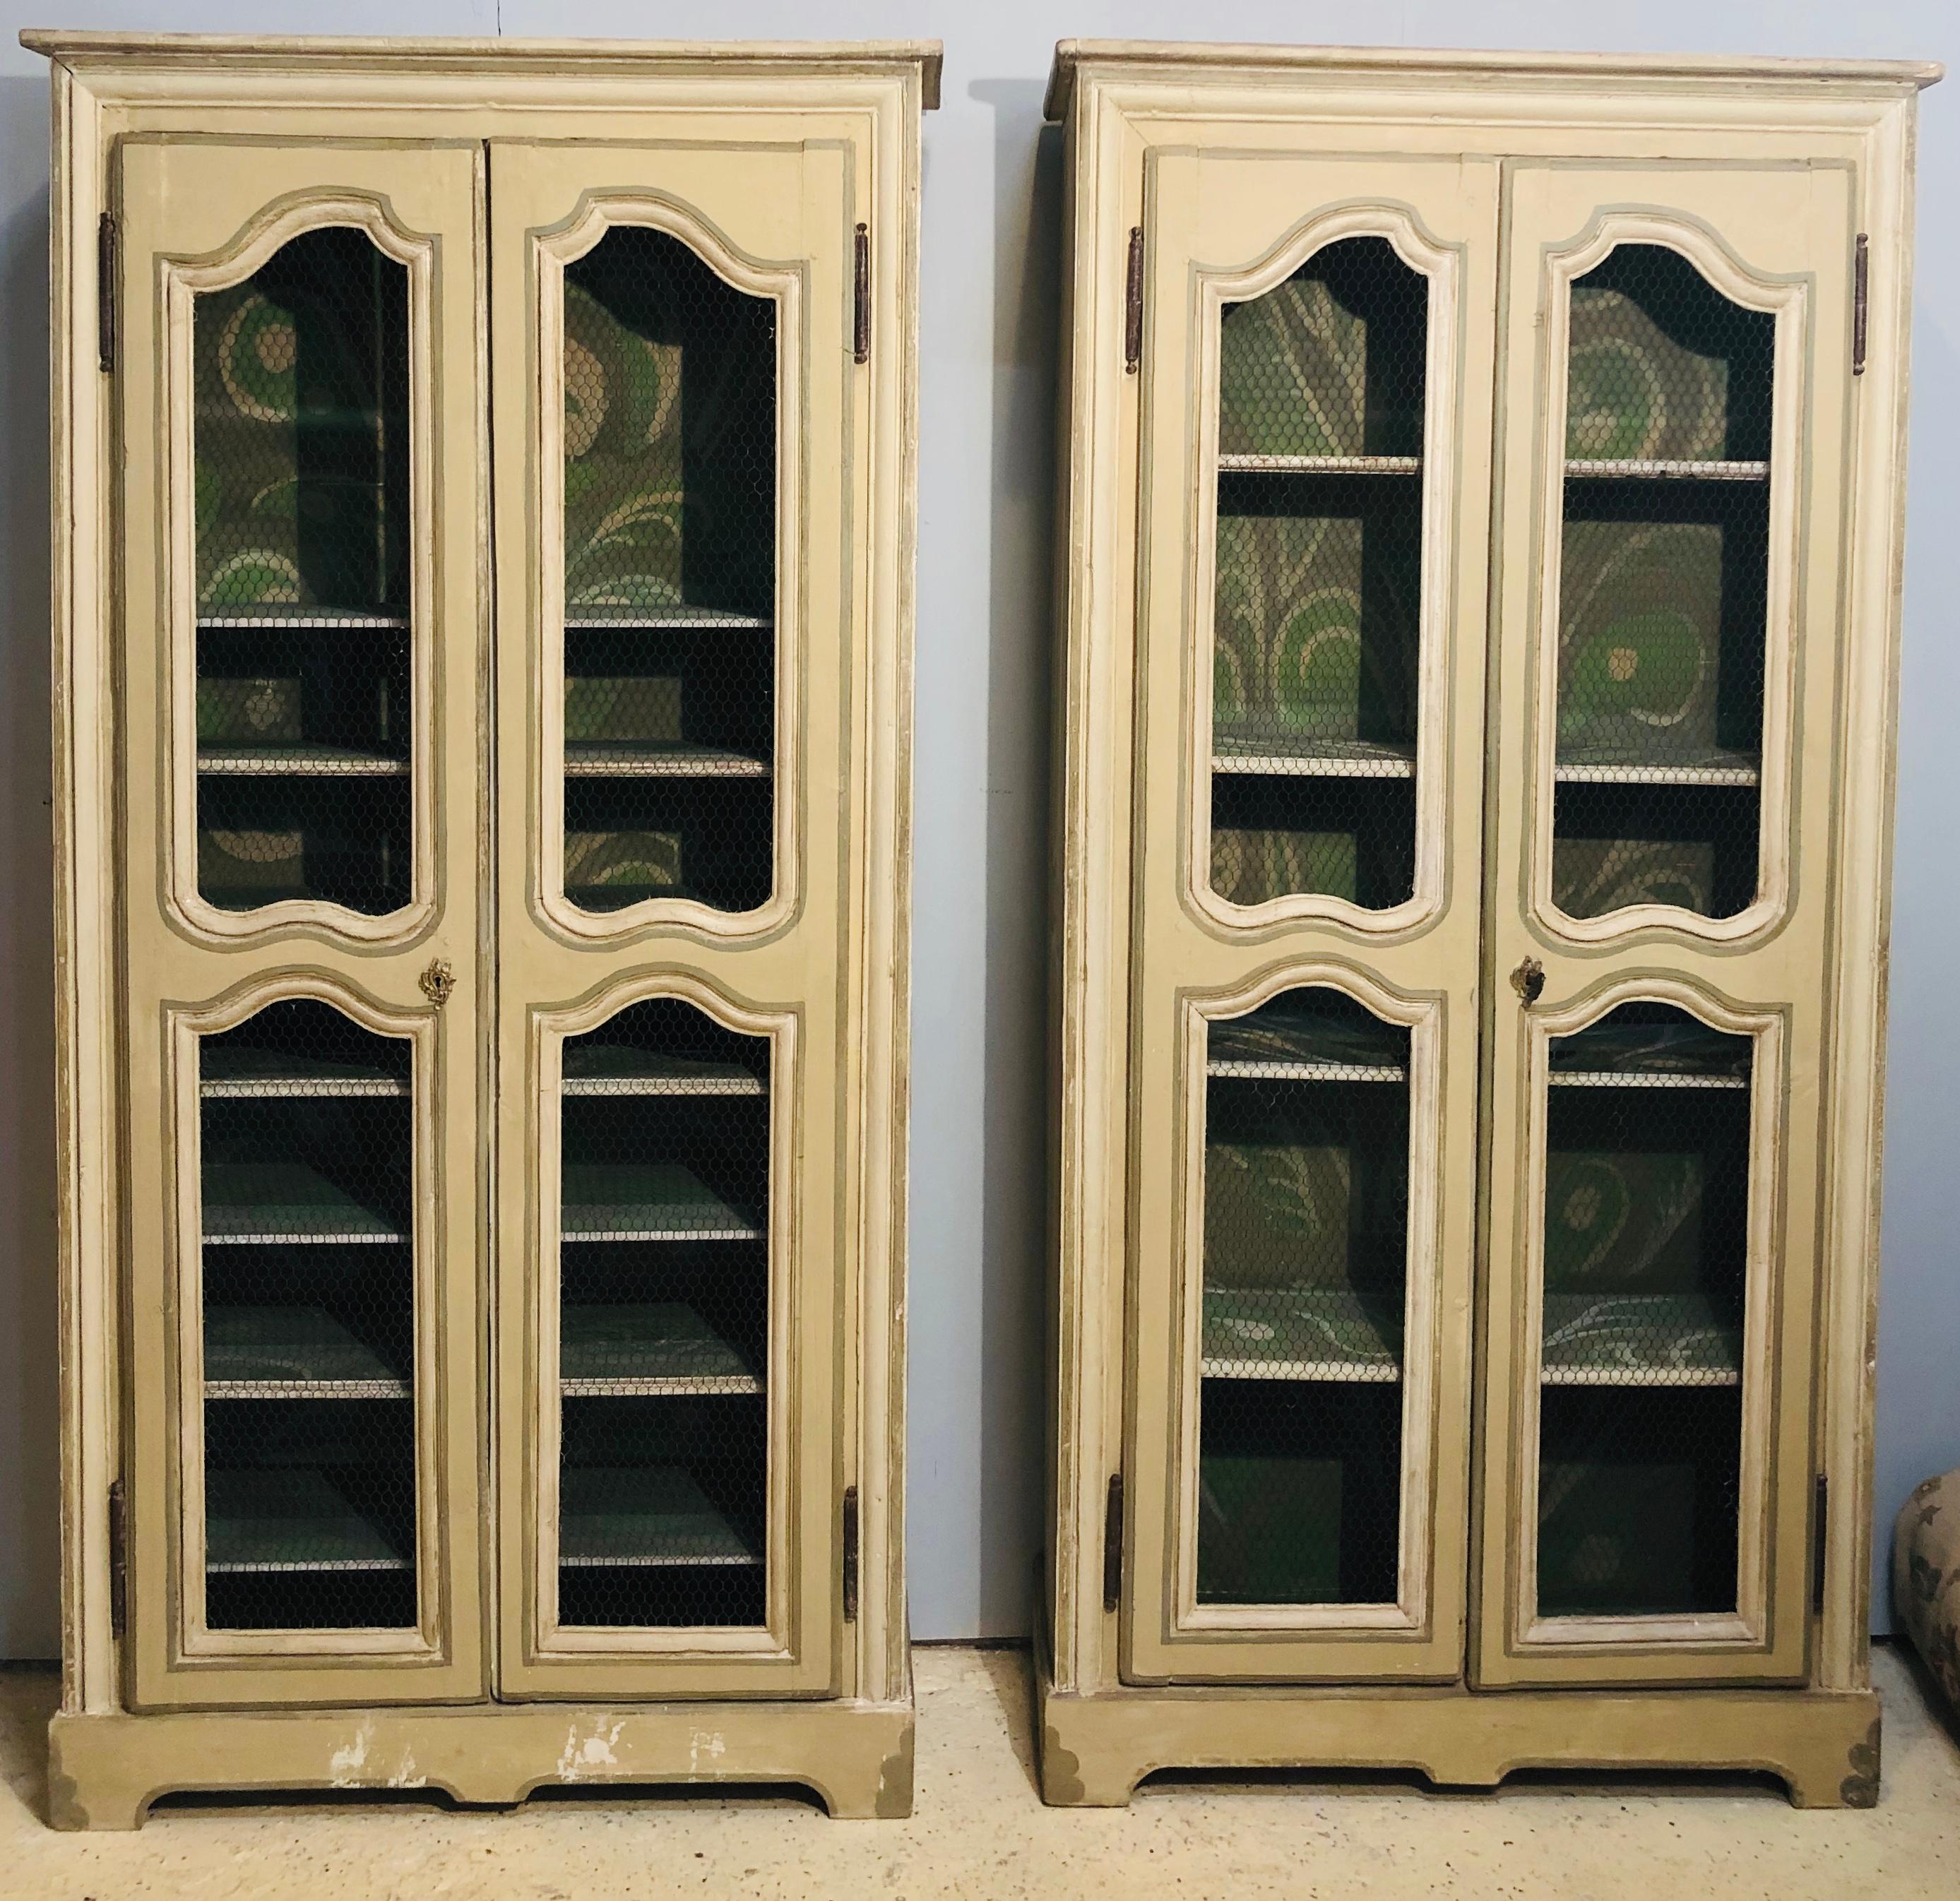 Pair of continental bookcase cabinets. Painted in an olive green with white and gray design this magnificent pair of bookcase cabinets are simply worthy of any home setting. The pair sit in their original splendor with a fully painted interior and